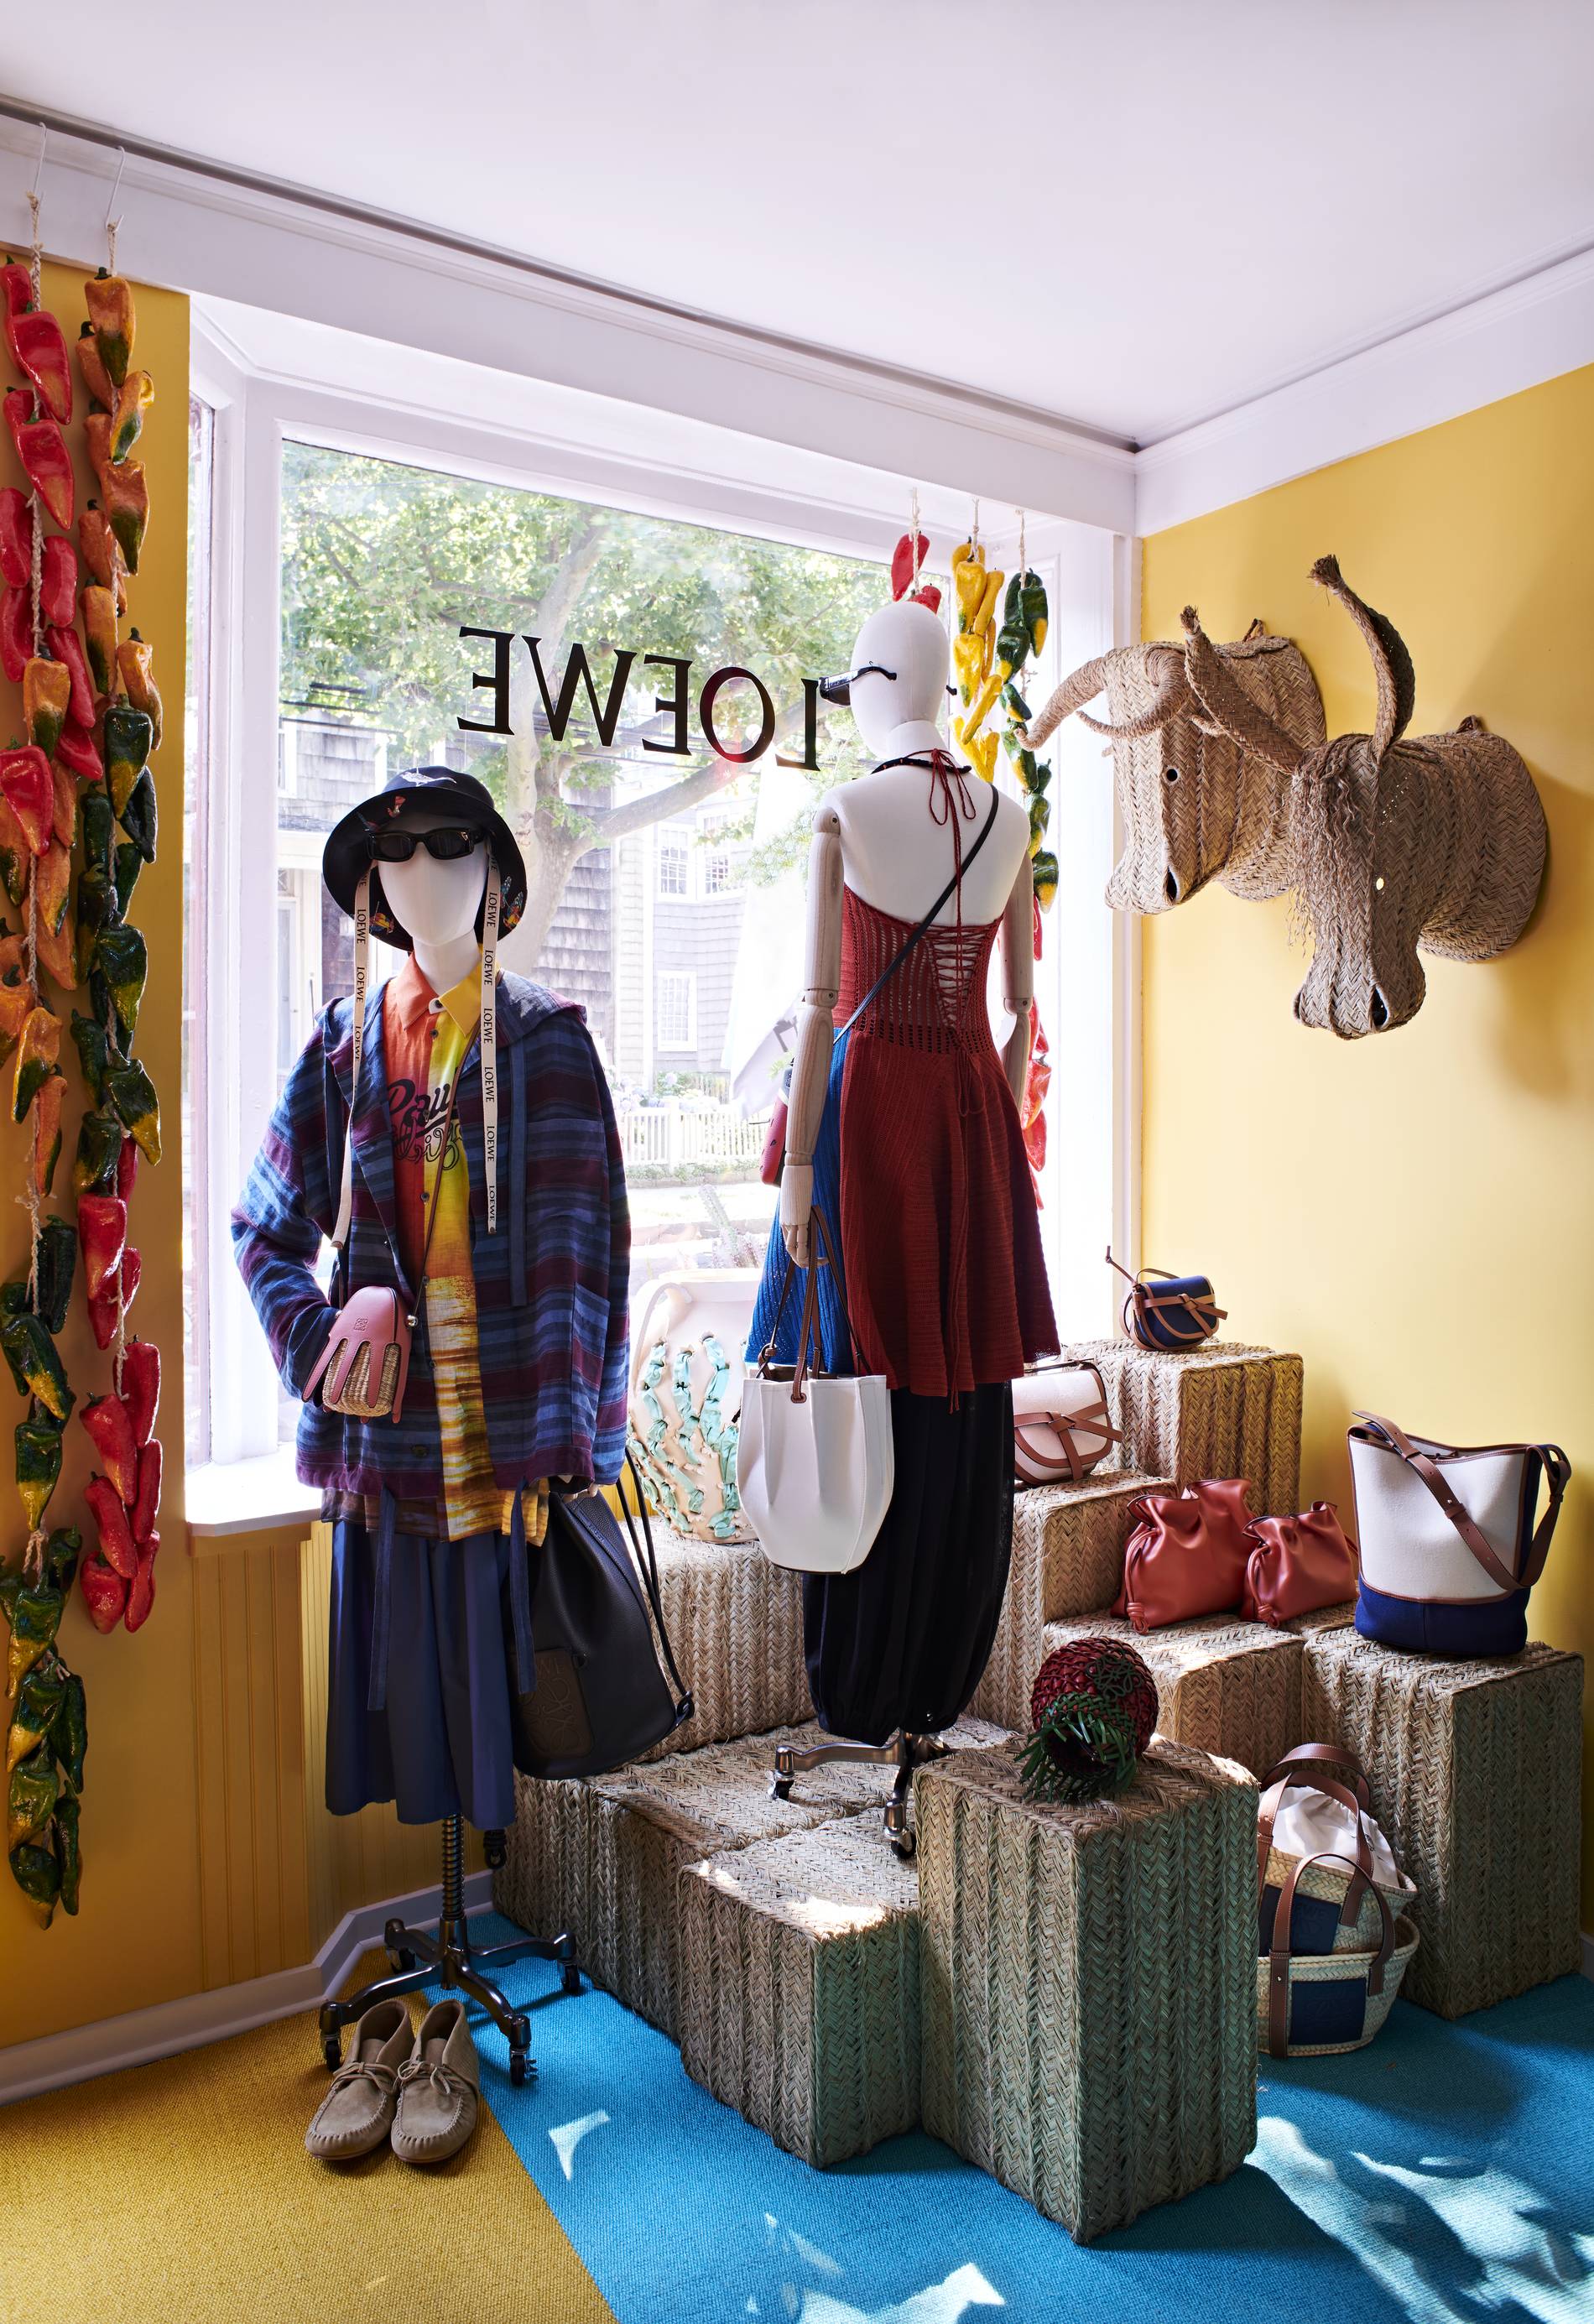 Window dressing at retail: we learn from Loewe